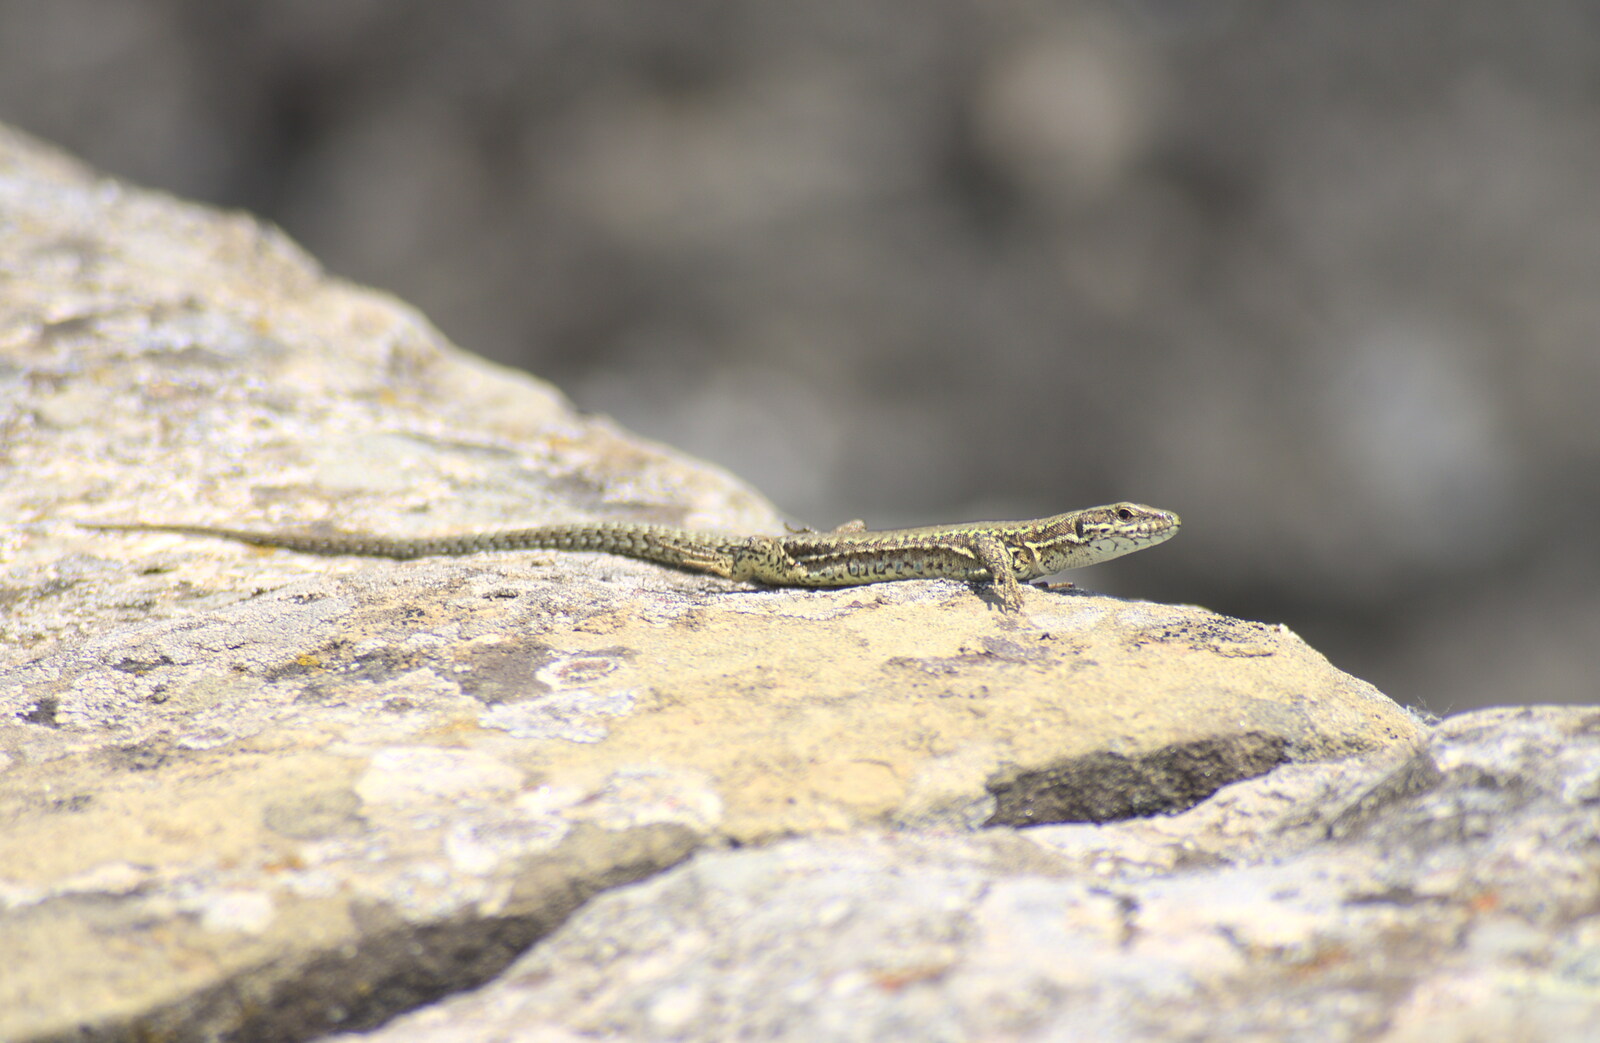 Another lizard scurries about from La Verna Monastery and the Fireflies of Tuscany, Italy - 14th June 2013